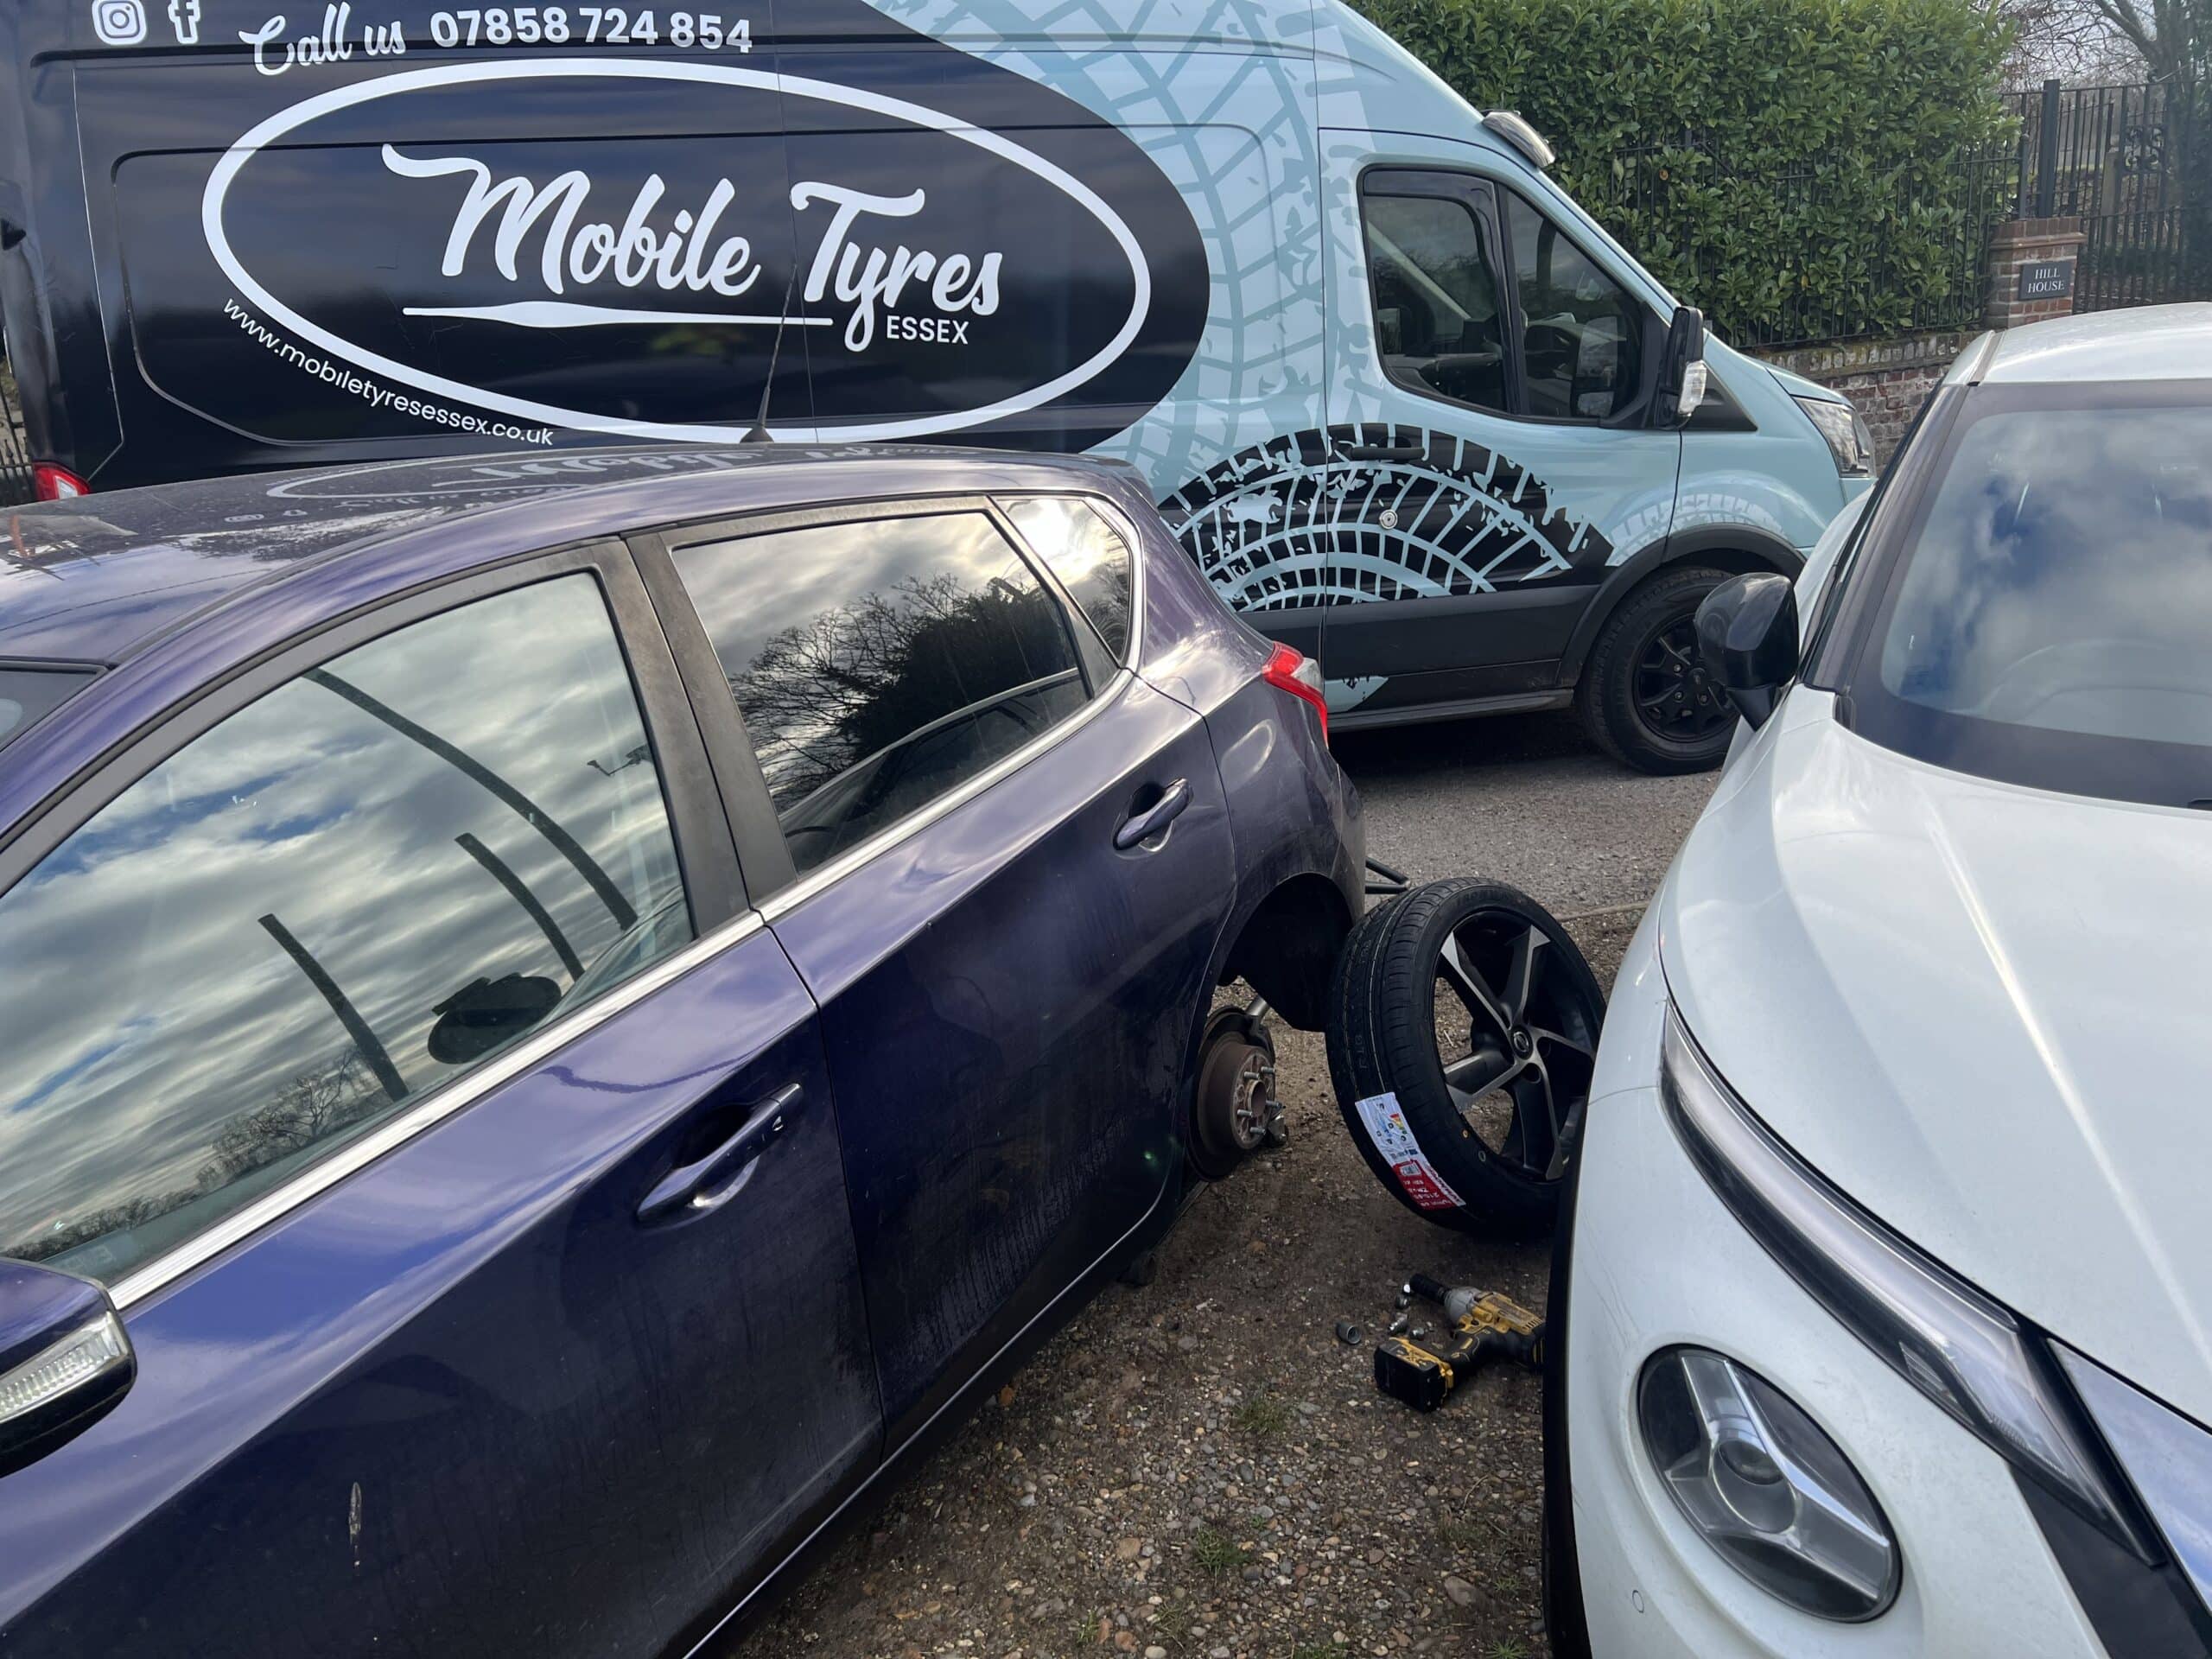 24 Hour Mobile Tyres Essex